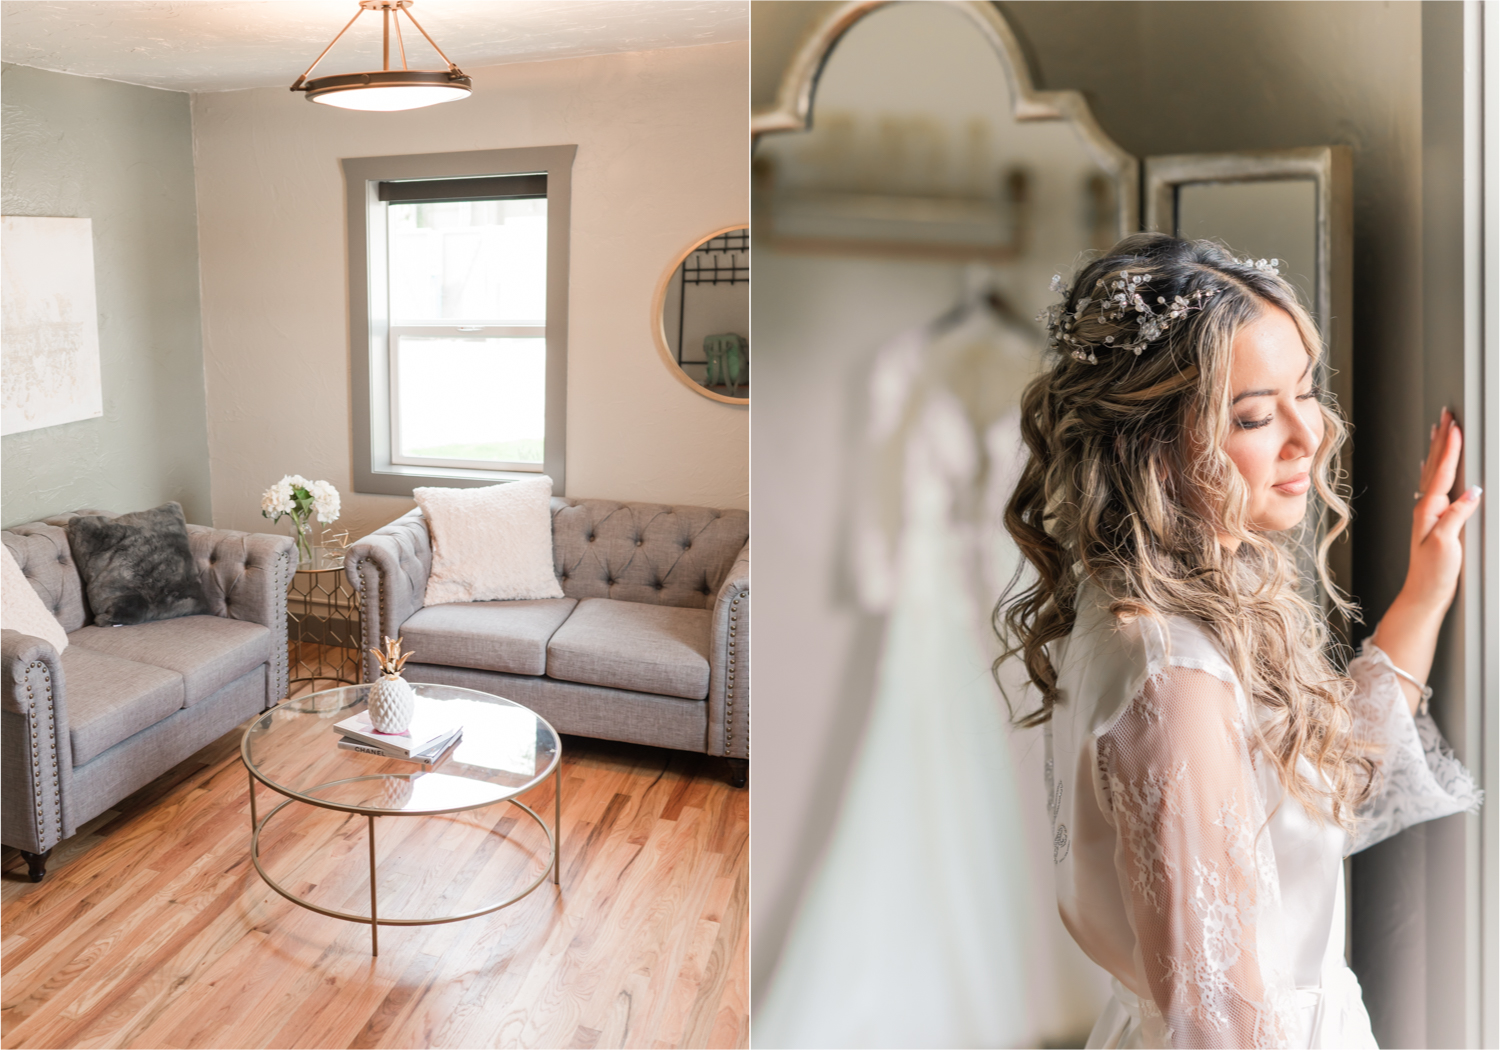 Romantic and Rustic Wedding at The Mill in Windsor | Britni Girard Photography | Colorado based wedding photography and videography team | The Bridal House at The Mill